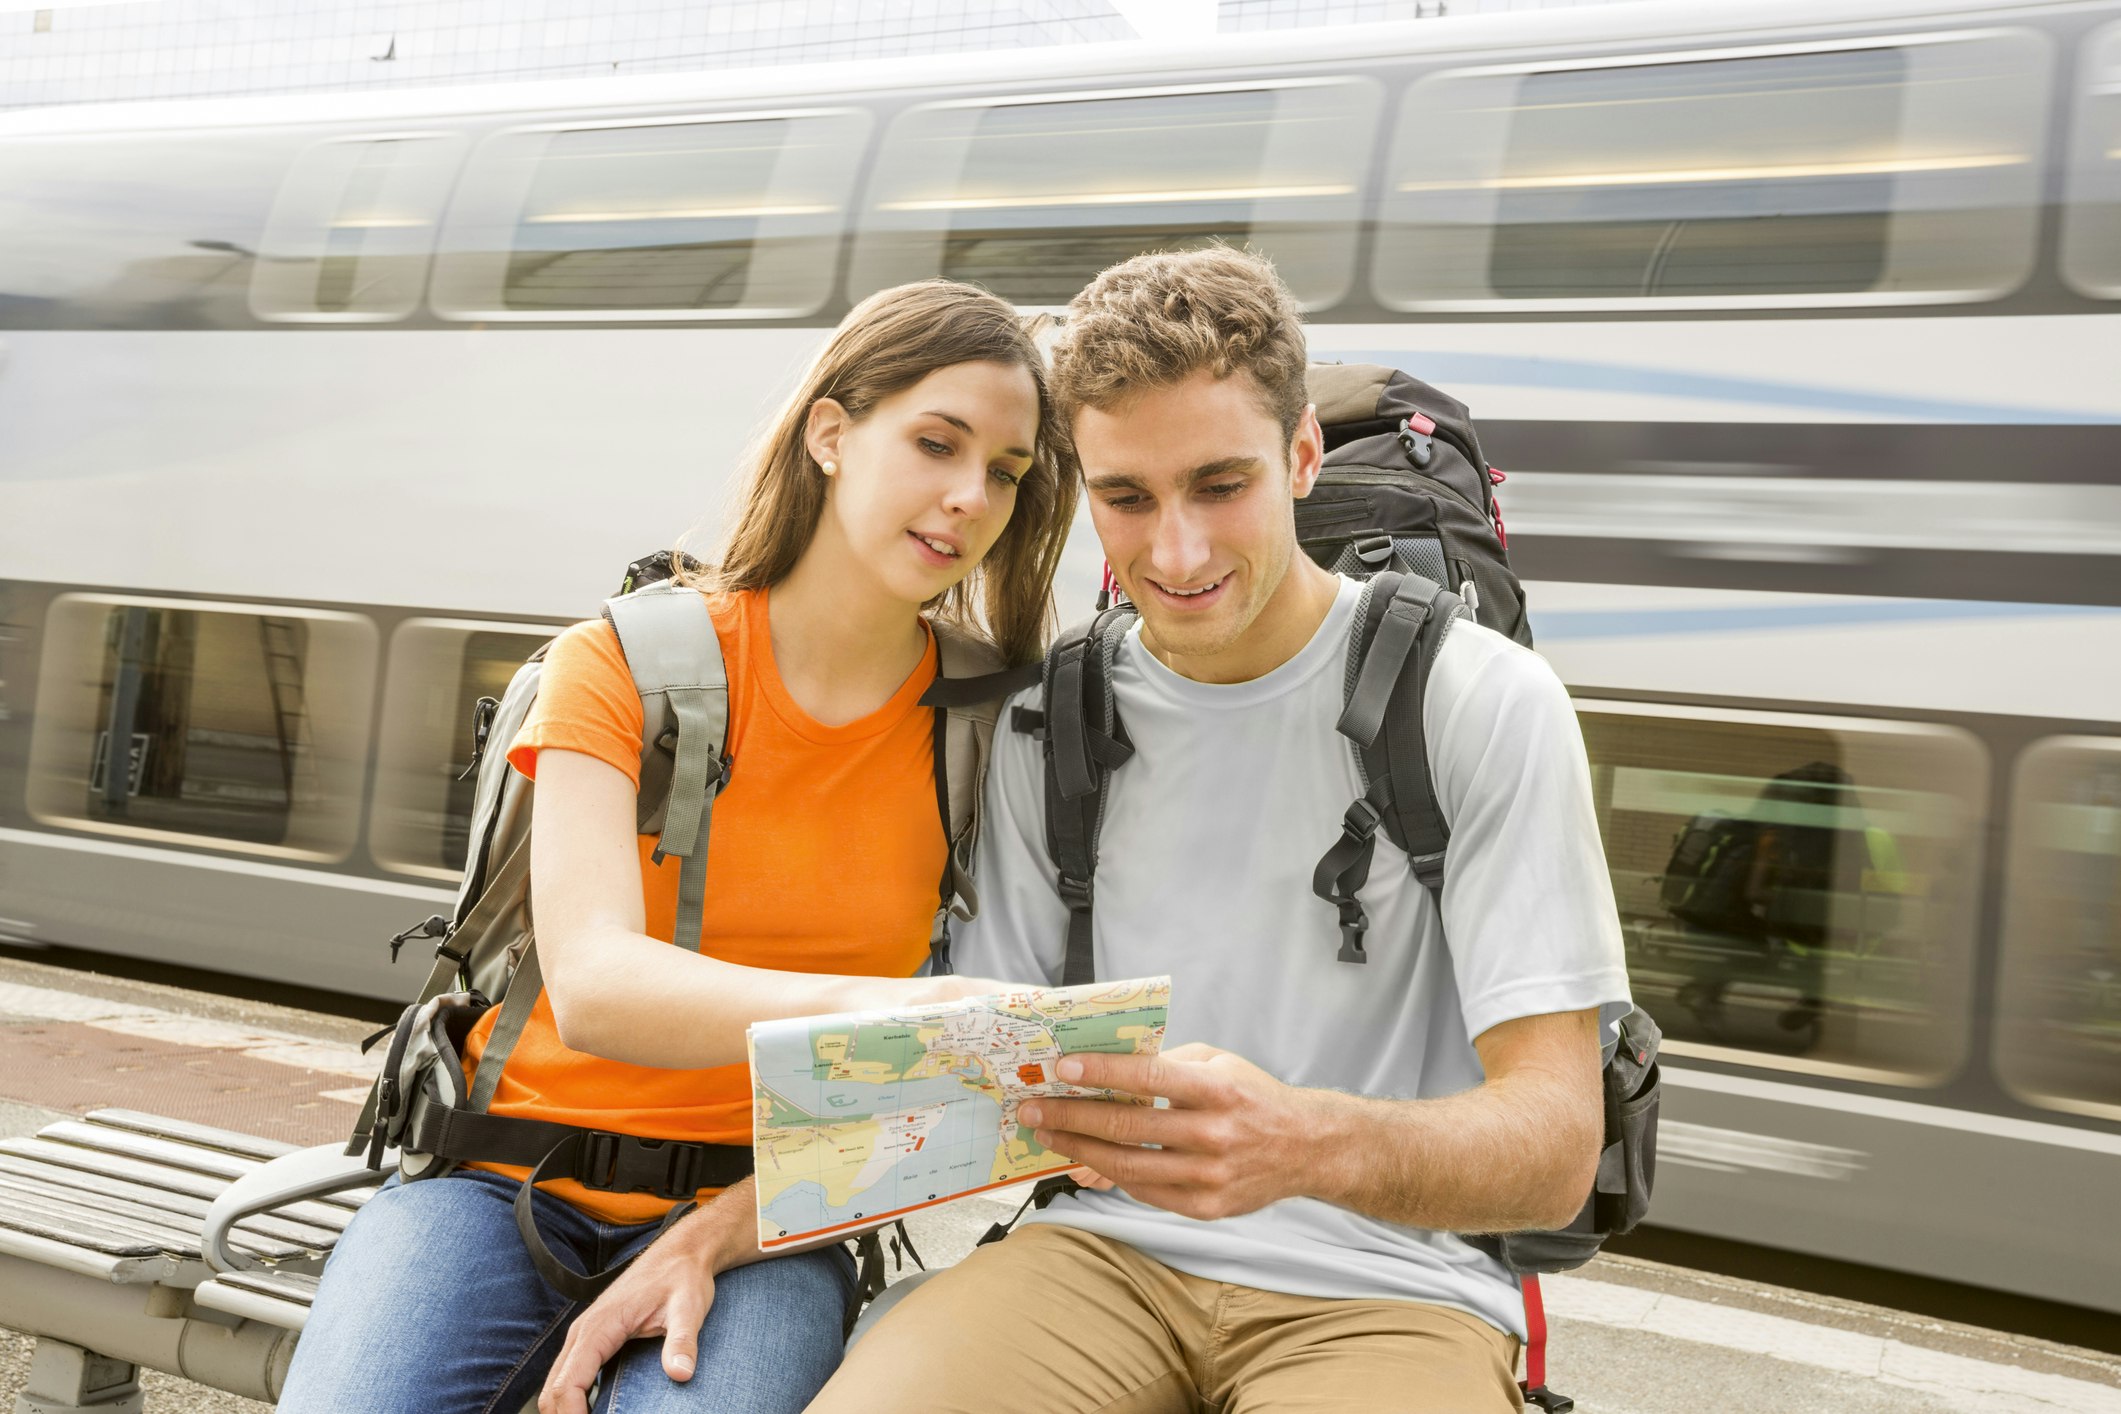 Caucasian couple sitting on bench near a train reading map